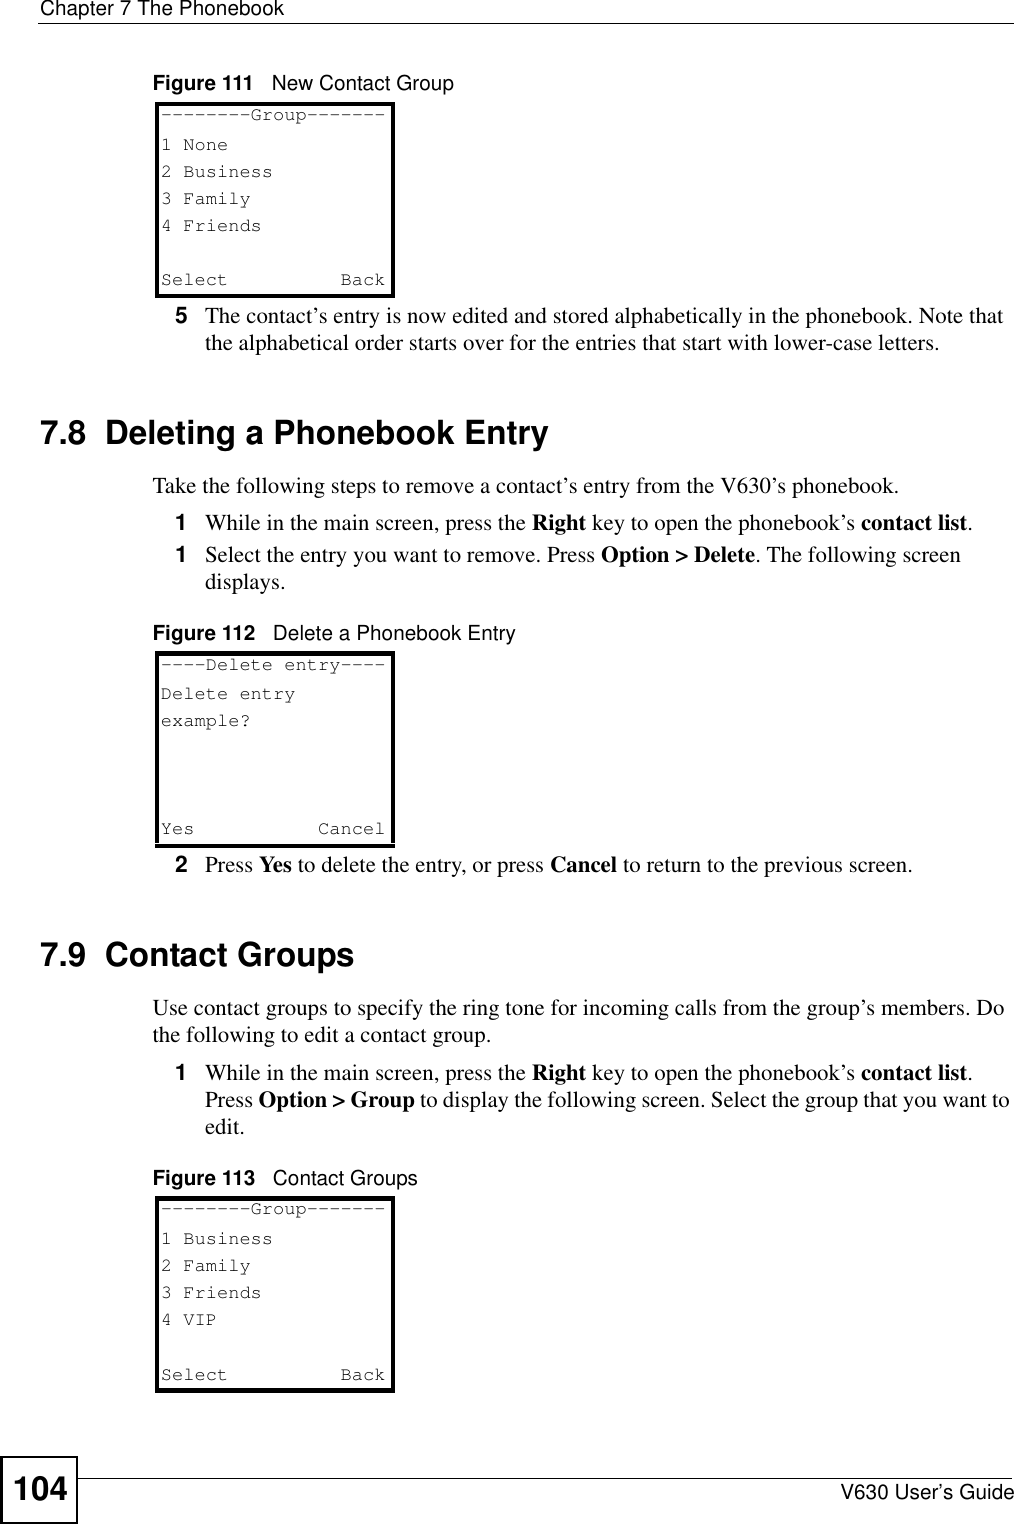 Chapter 7 The PhonebookV630 User’s Guide104Figure 111   New Contact Group5The contact’s entry is now edited and stored alphabetically in the phonebook. Note that the alphabetical order starts over for the entries that start with lower-case letters. 7.8  Deleting a Phonebook EntryTake the following steps to remove a contact’s entry from the V630’s phonebook.1While in the main screen, press the Right key to open the phonebook’s contact list.1Select the entry you want to remove. Press Option &gt; Delete. The following screen displays.Figure 112   Delete a Phonebook Entry2Press Yes to delete the entry, or press Cancel to return to the previous screen.7.9  Contact GroupsUse contact groups to specify the ring tone for incoming calls from the group’s members. Do the following to edit a contact group.1While in the main screen, press the Right key to open the phonebook’s contact list. Press Option &gt; Group to display the following screen. Select the group that you want to edit.Figure 113   Contact Groups--------Group-------1 None2 Business3 Family4 FriendsSelect   Back----Delete entry----Delete entryexample?Yes Cancel--------Group-------1 Business2 Family3 Friends4 VIPSelect   Back